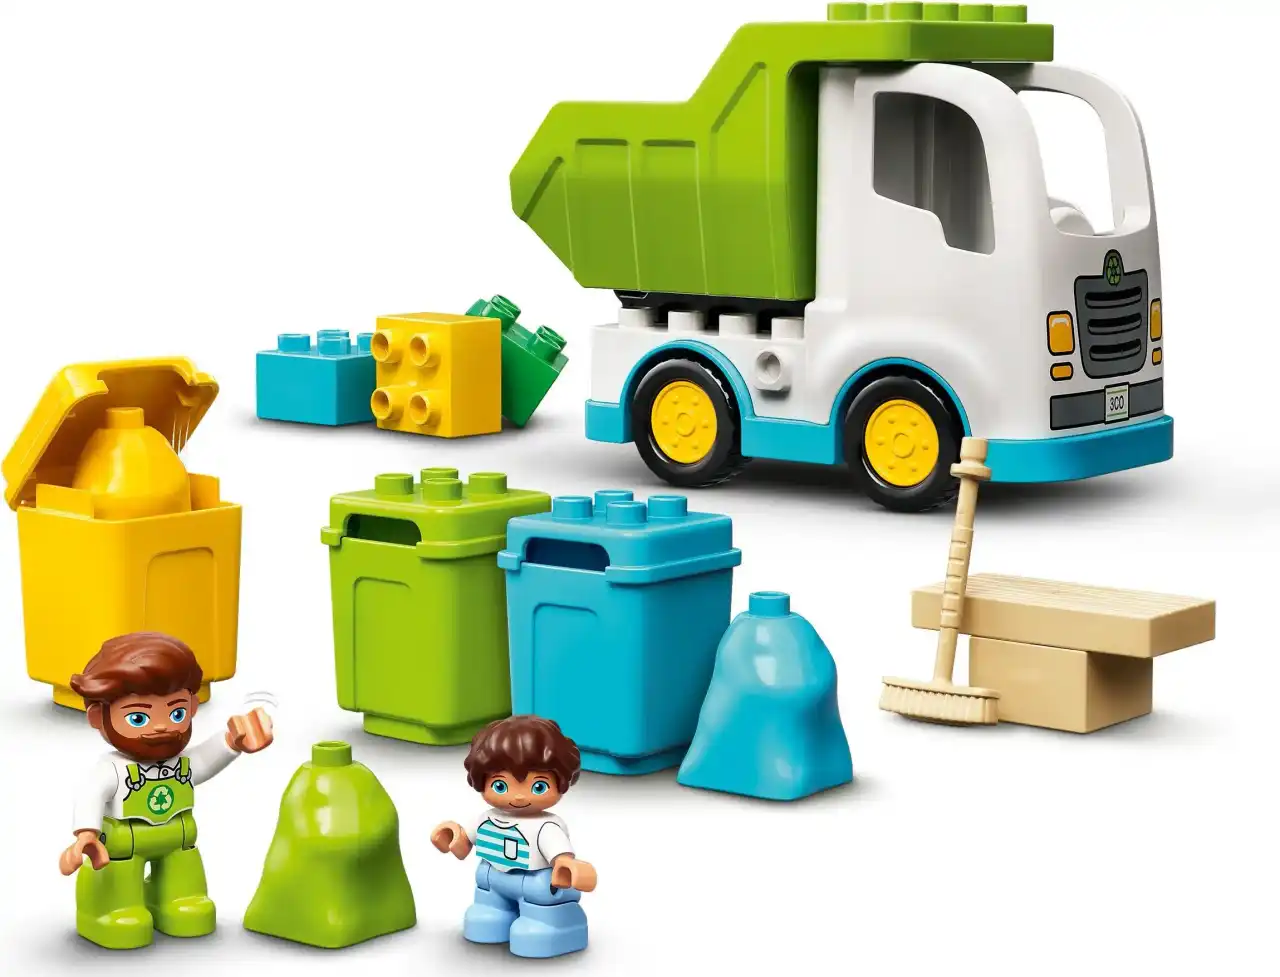 10945 - Garbage Truck and Recycling